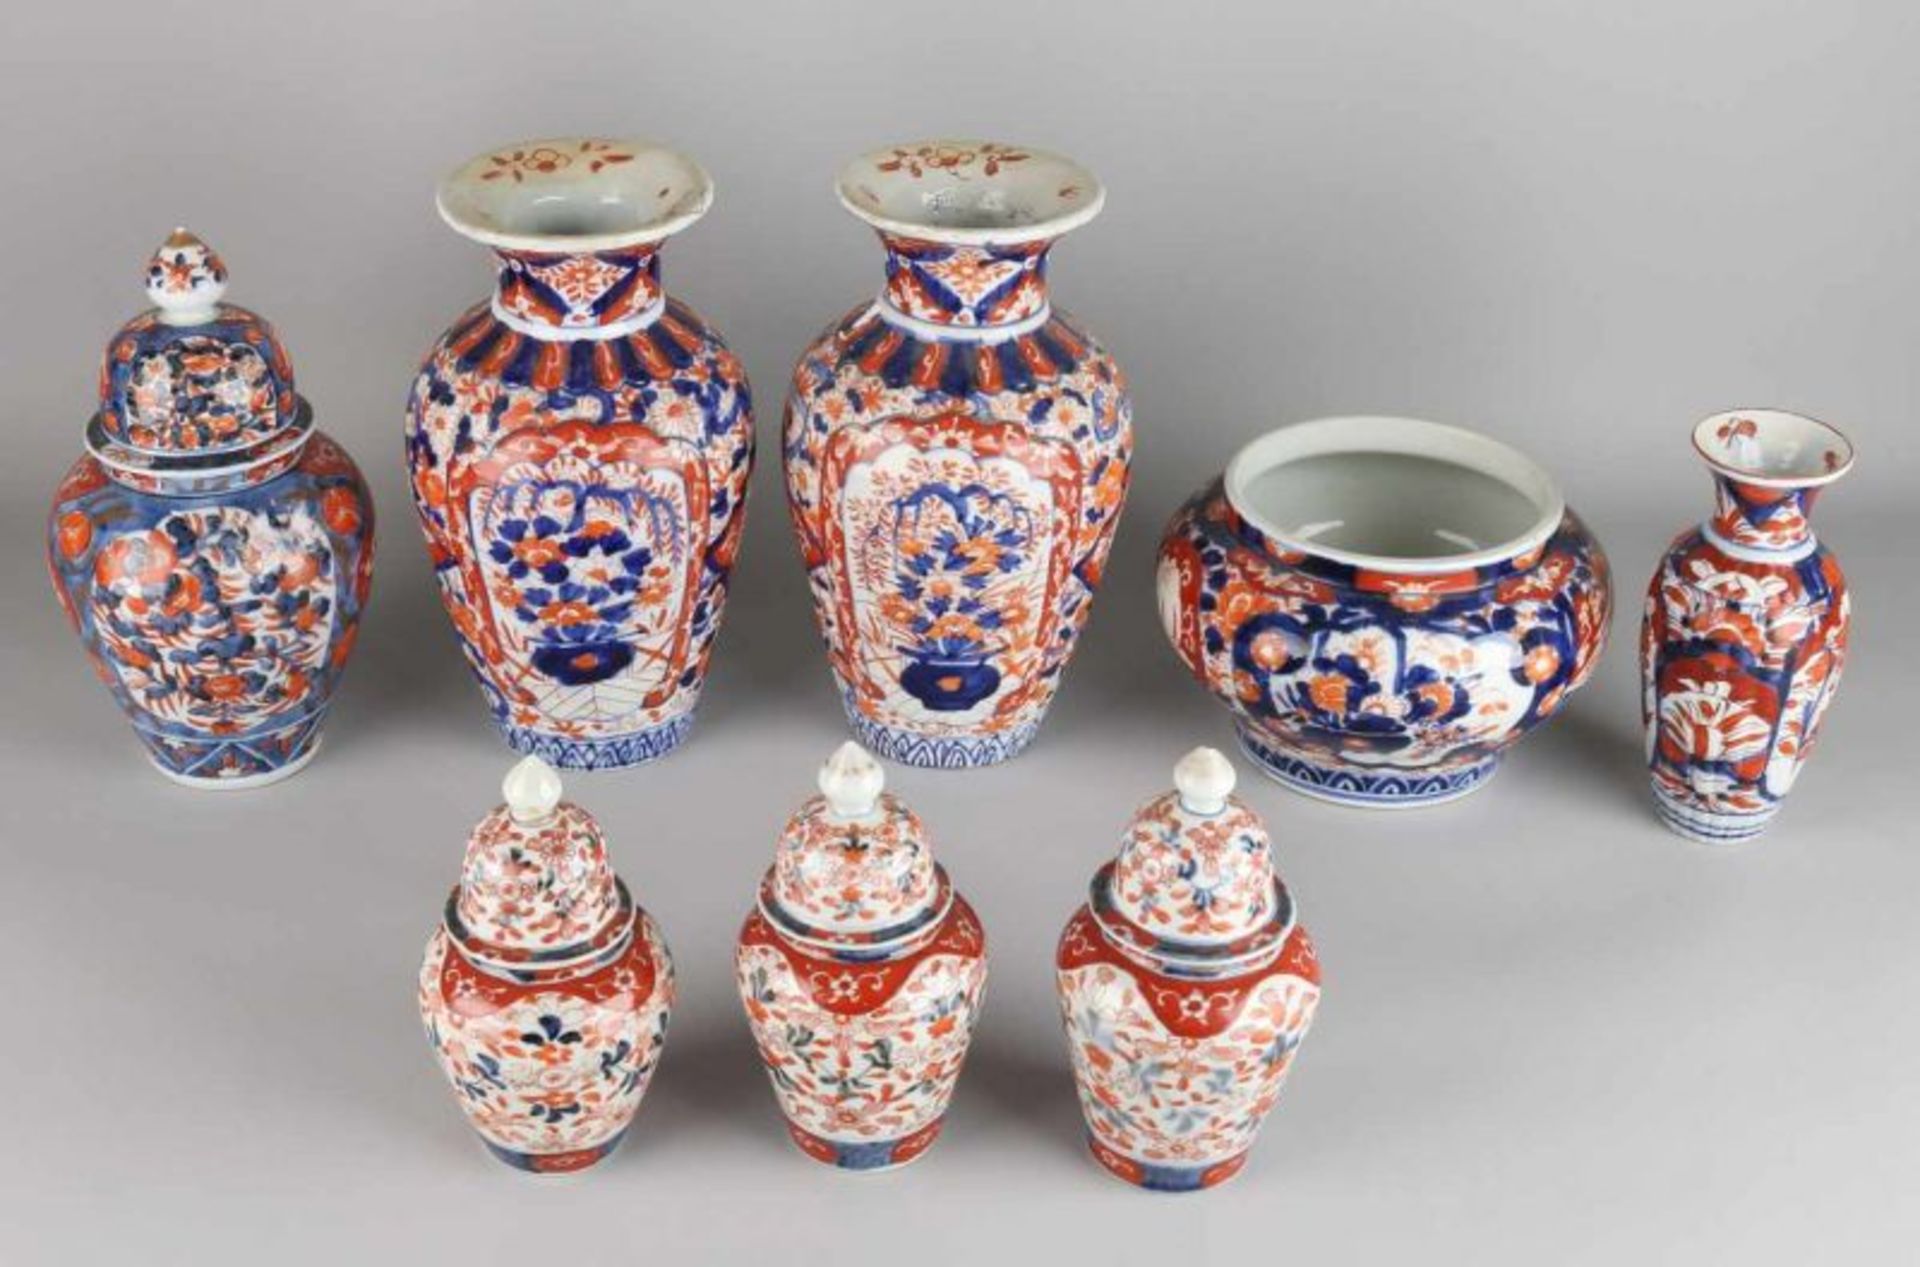 Eight times 19th century Imari porcelain vases. Divers. Some chips. Size: 15-27 cm in fair / good